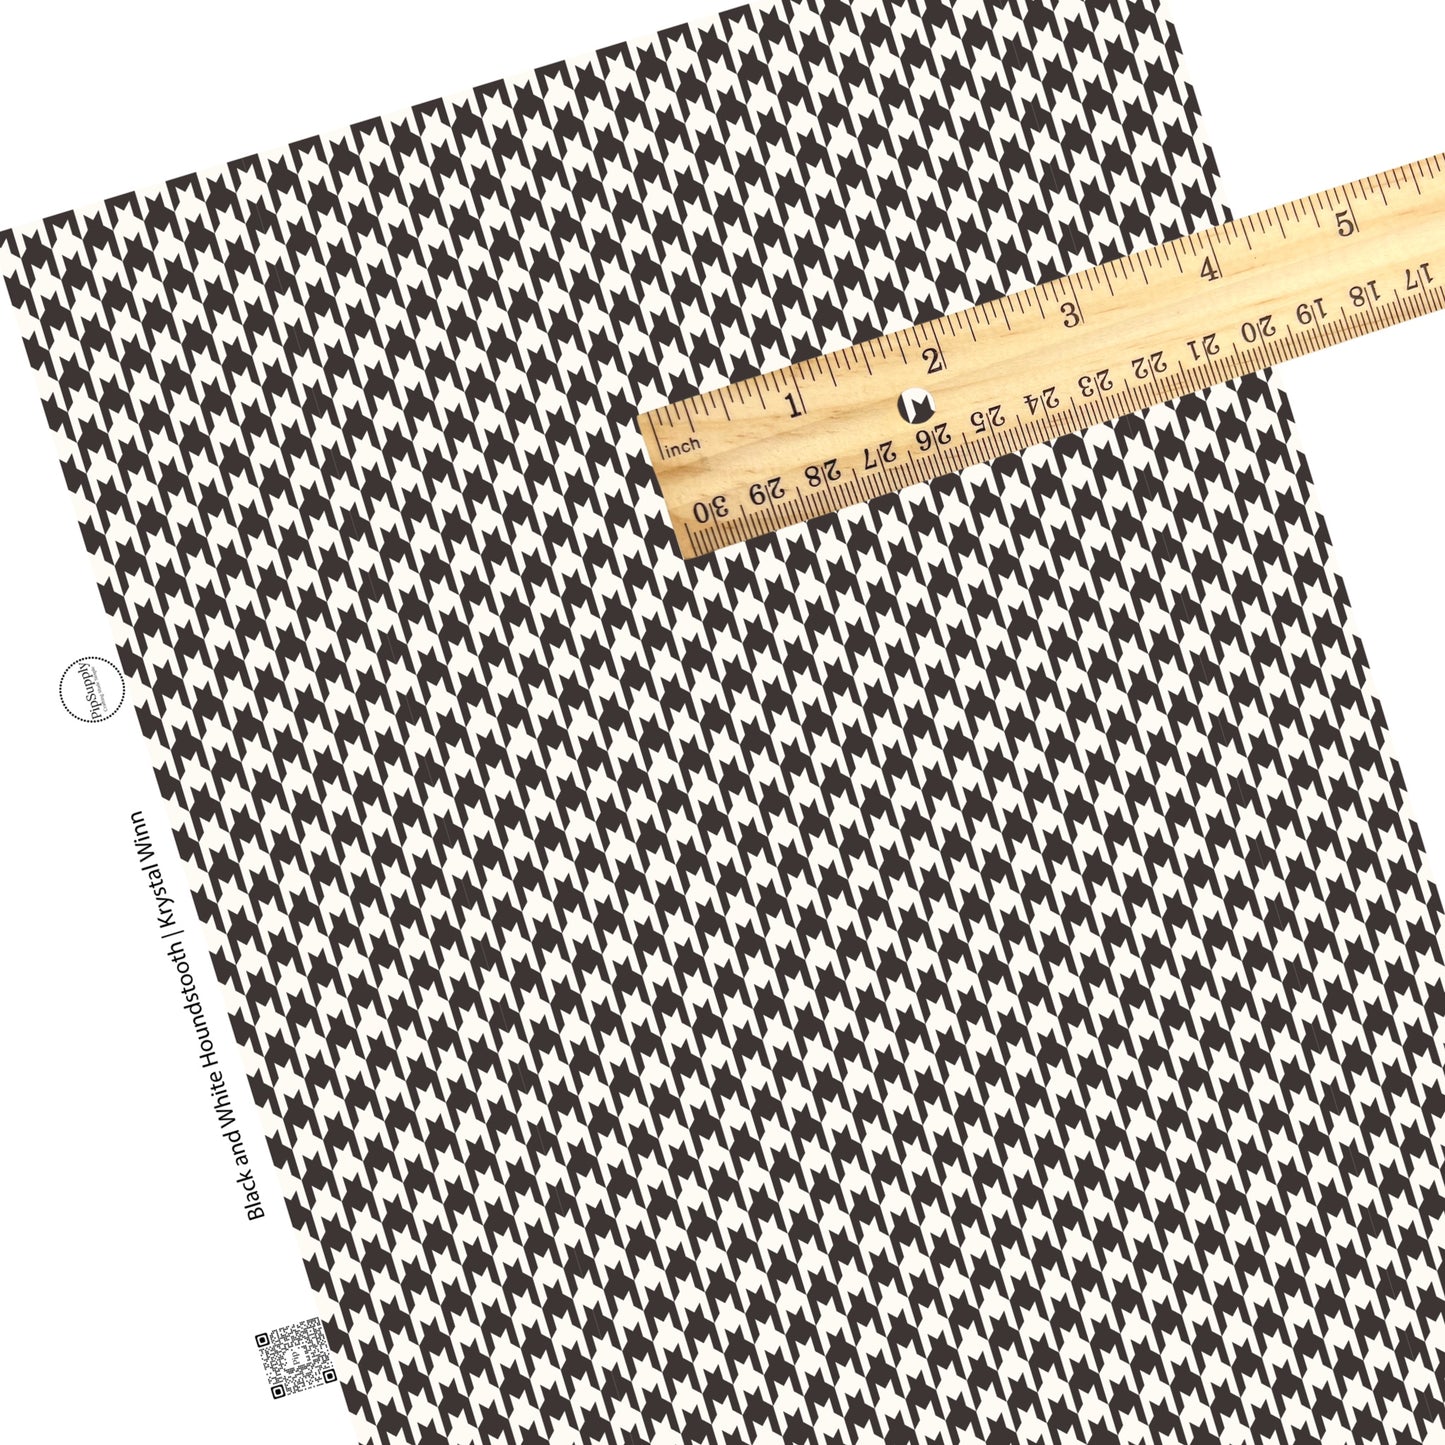 Black houndstooth on white faux leather sheets